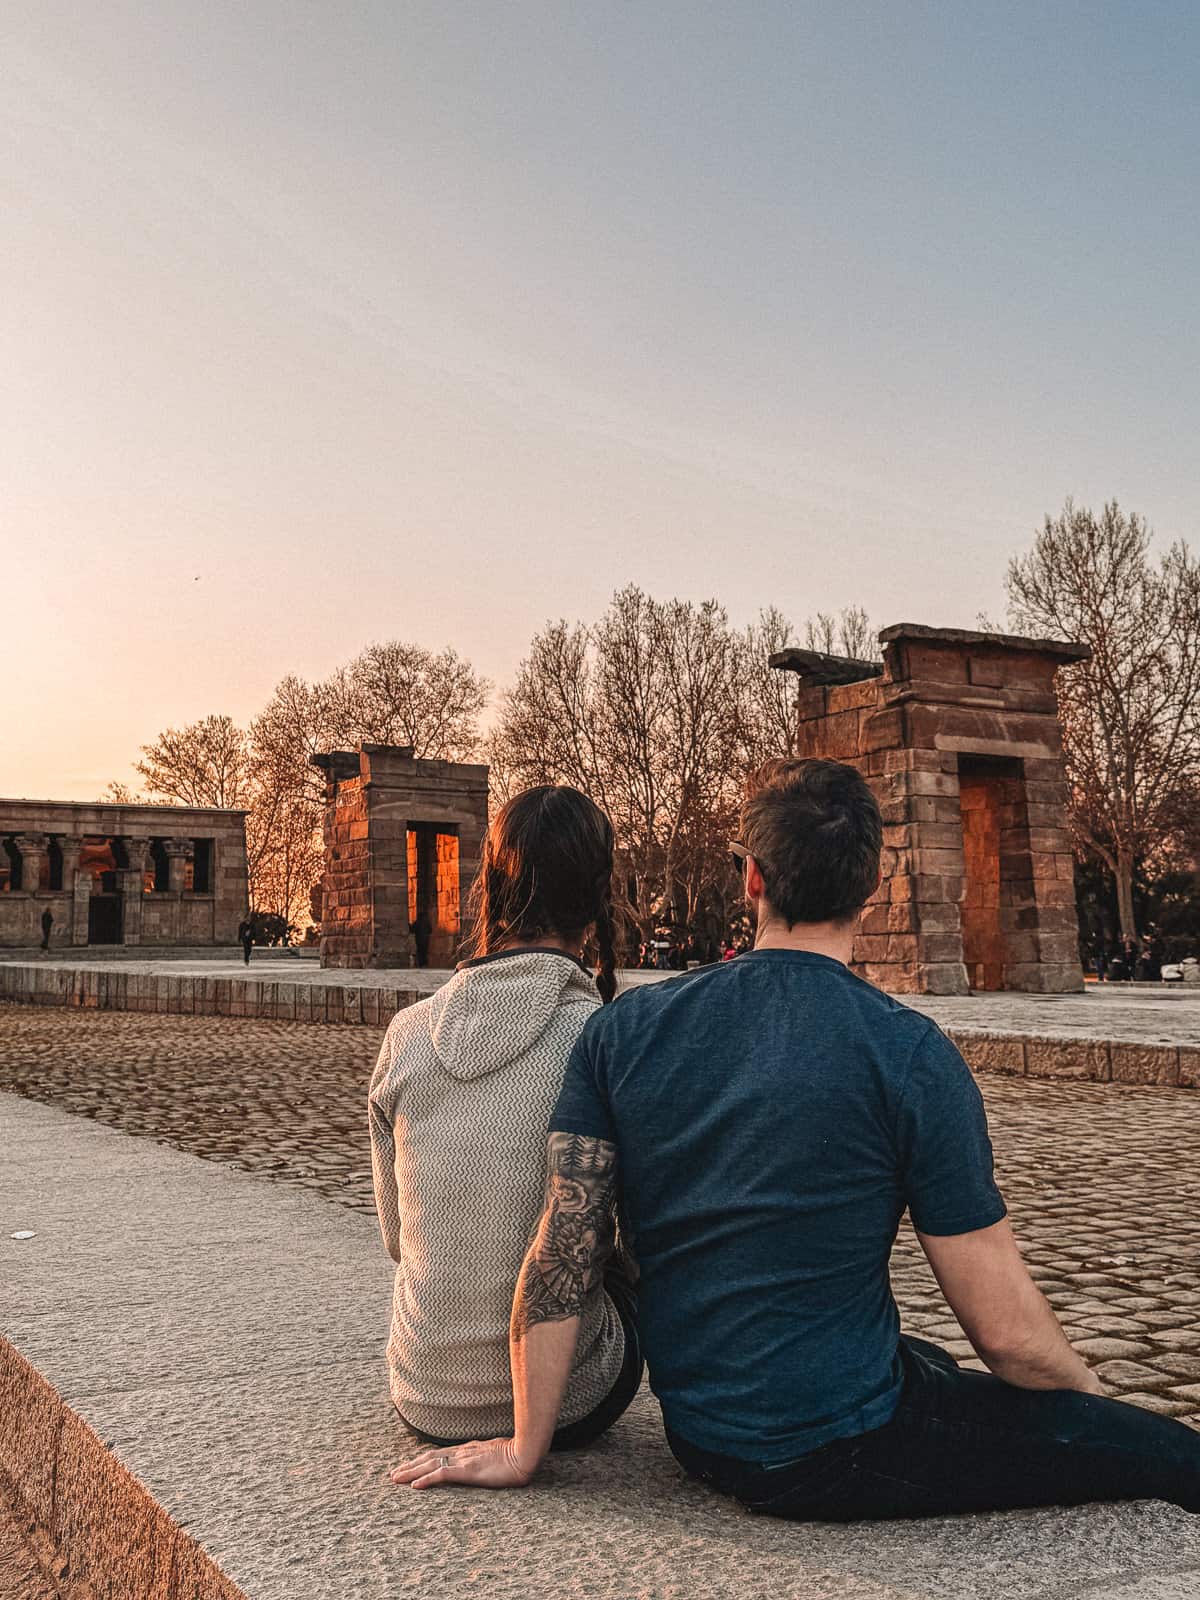 A couple sitting peacefully at dusk by the Templo de Debod, an ancient Egyptian temple in the heart of Madrid.